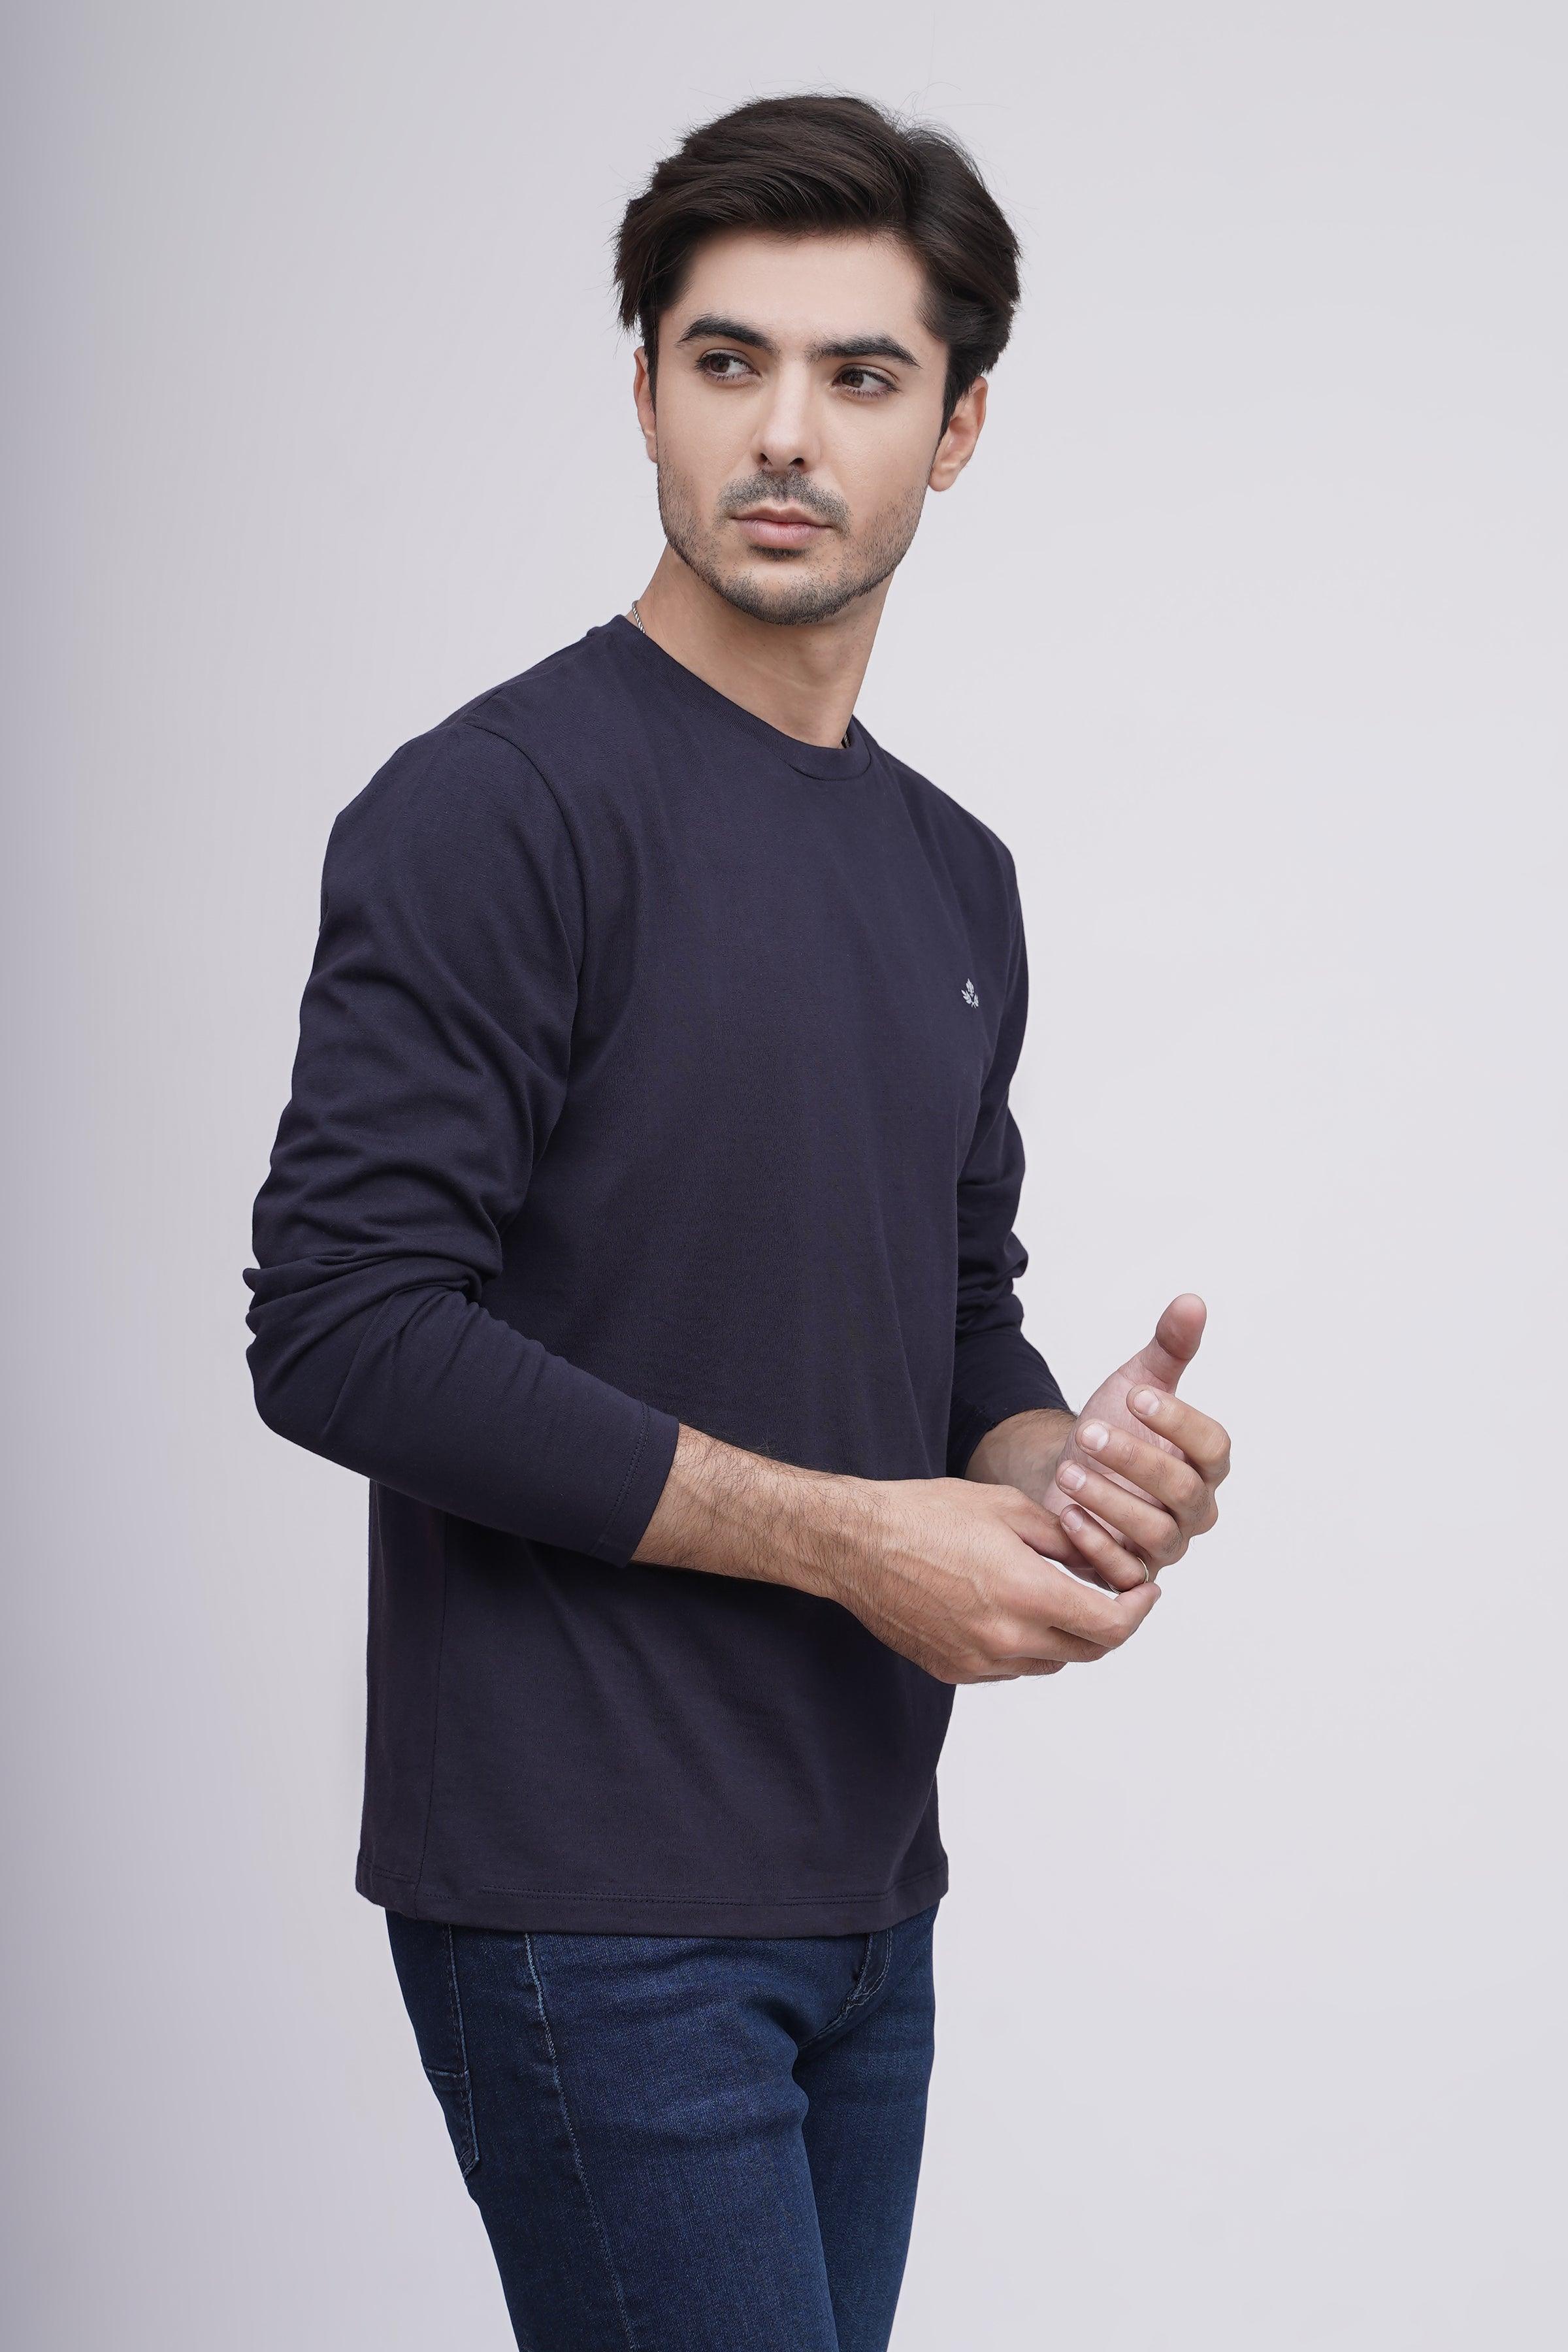 T SHIRT CREW NECK NAVY at Charcoal Clothing